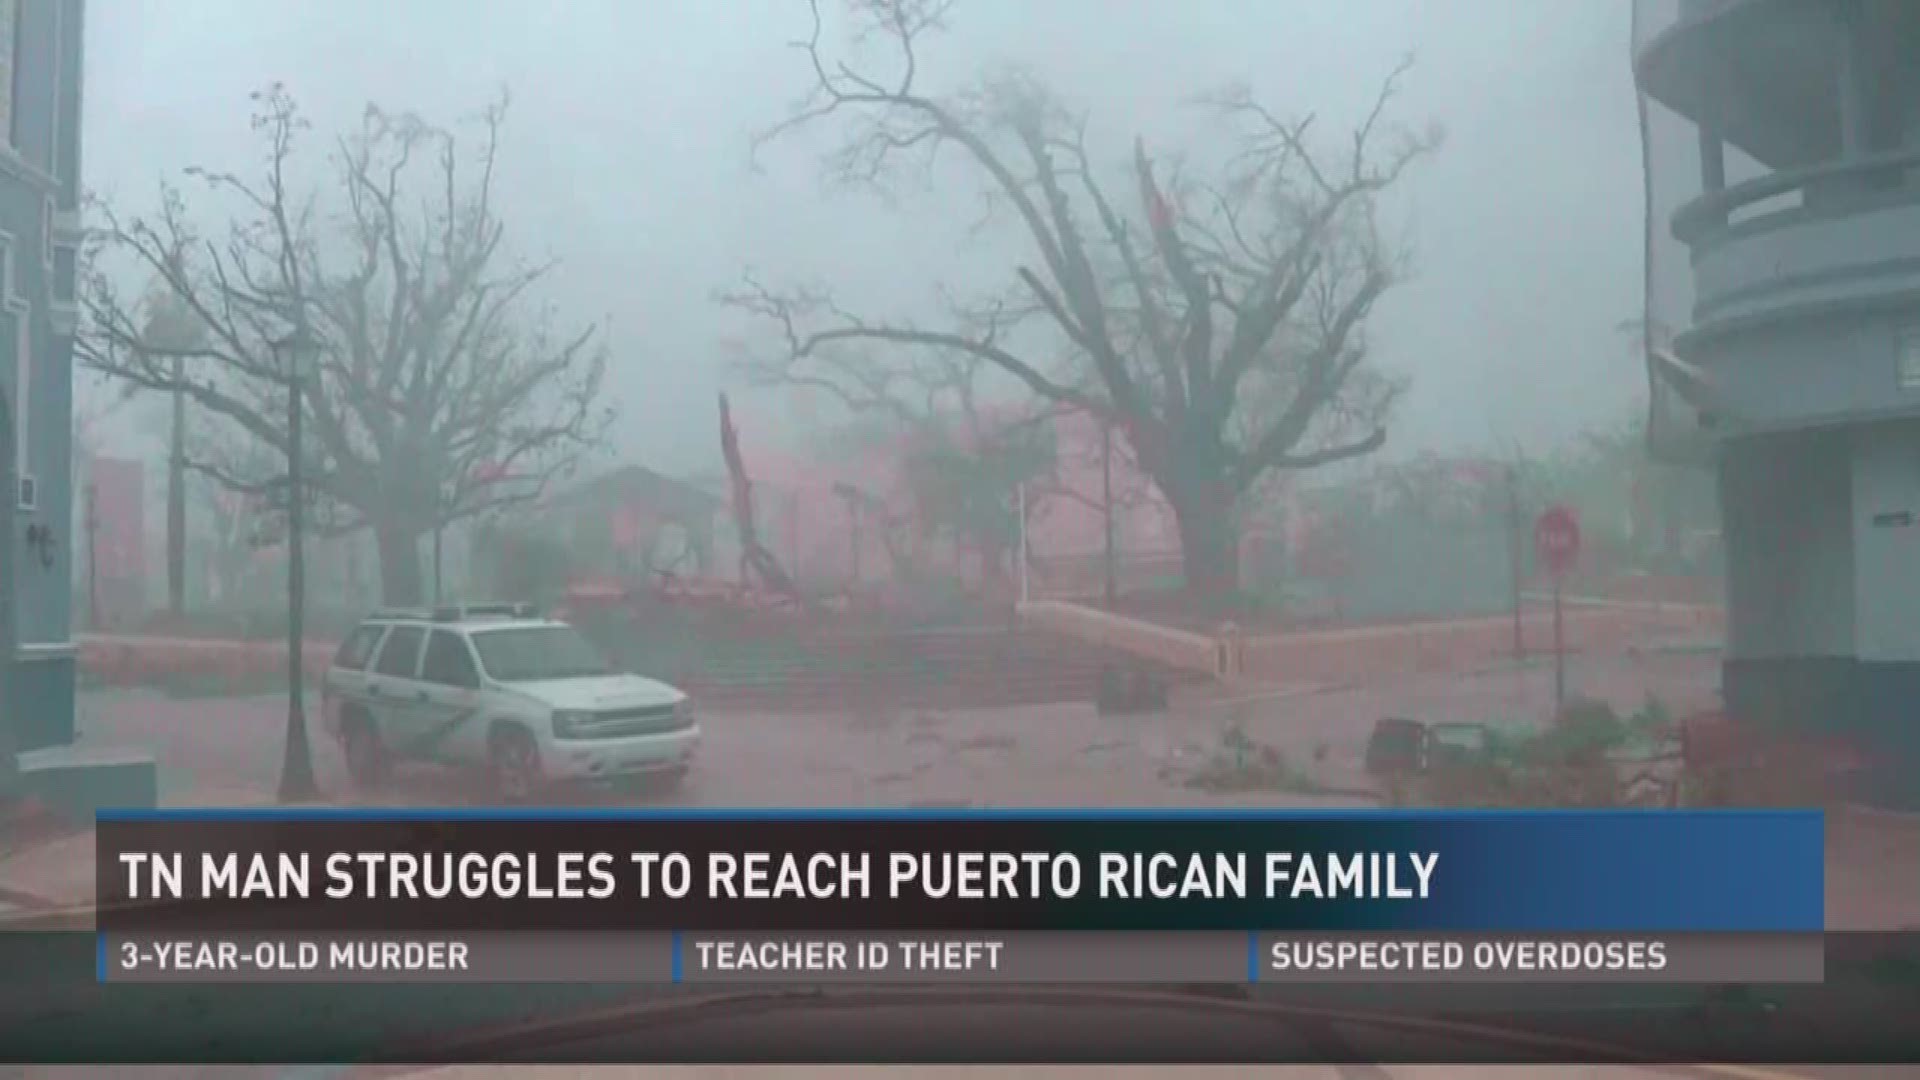 Sept. 27, 2017: A week after Hurricane Maria caused widespread destruction in Puerto Rico, East Tennesseans are still struggling to reach their family members on the island.